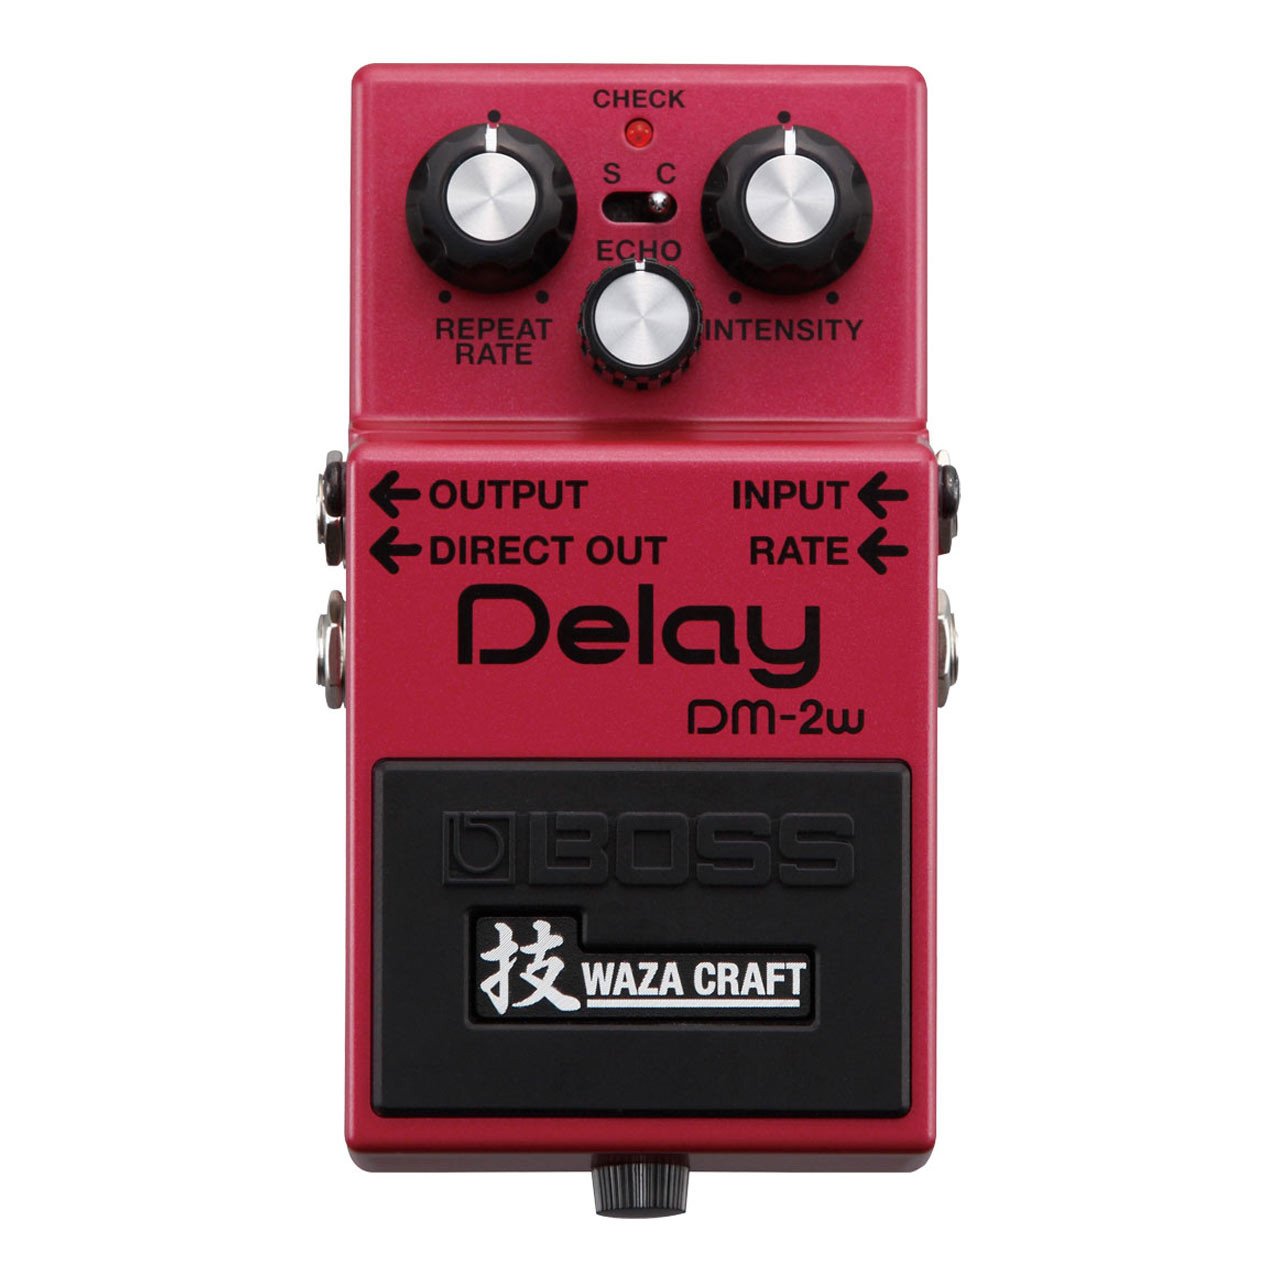 Pedals & Effects - BOSS DM-2W Delay Pedal